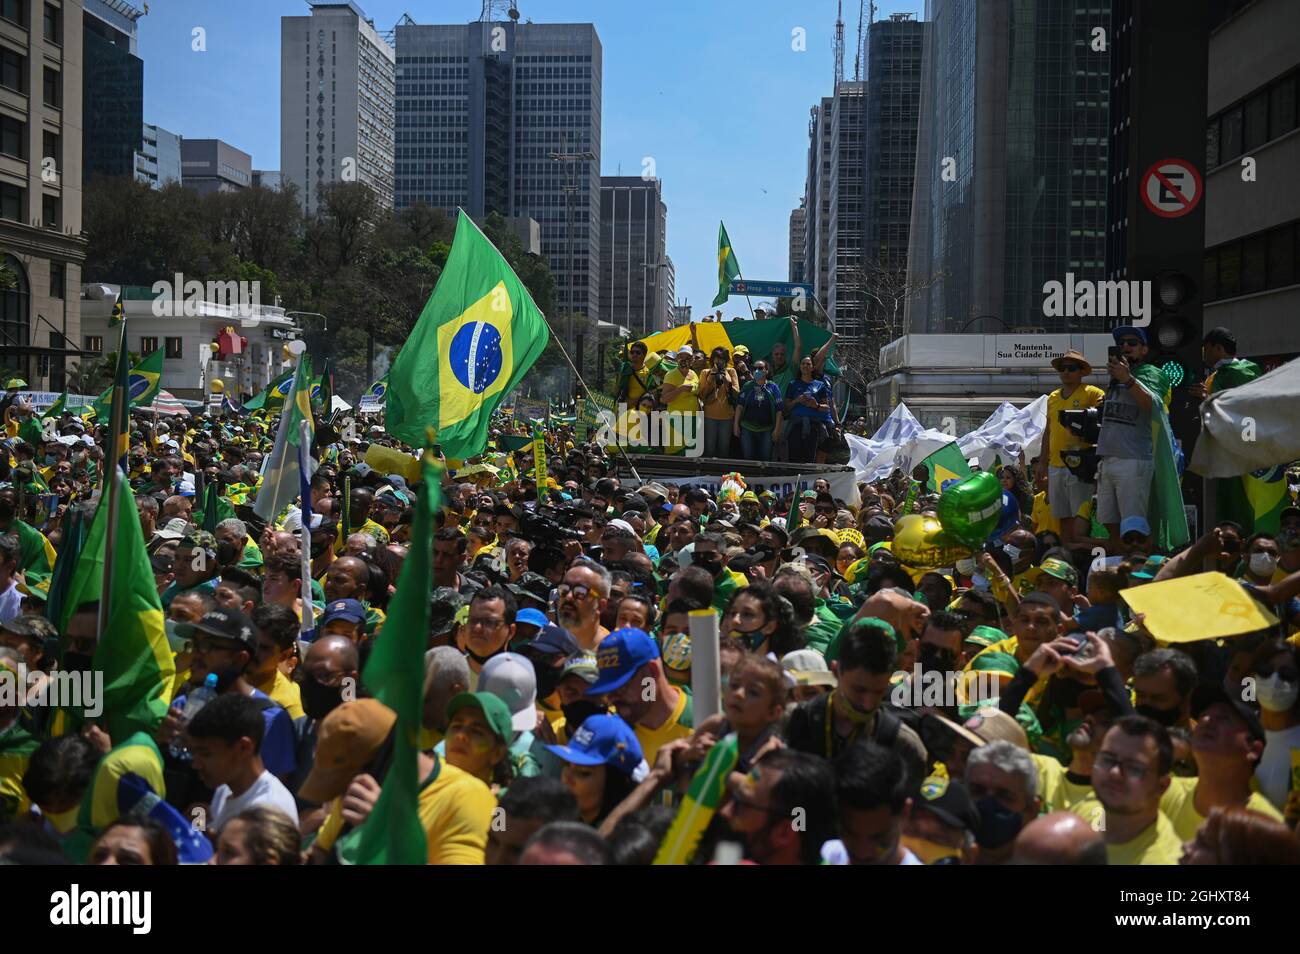 Sao Paulo, Brazil. 07th Sep, 2021. Supporters of President Bolsonaro take part in a rally in support of the head of state on Independence Day. Tens of thousands of people have demonstrated in support of Bolsonaro with anti-democratic slogans. The right-wing leader himself threatened the Supreme Court STF during a speech in Brasilia. Credit: Andre Borges/dpa/Alamy Live News Stock Photo